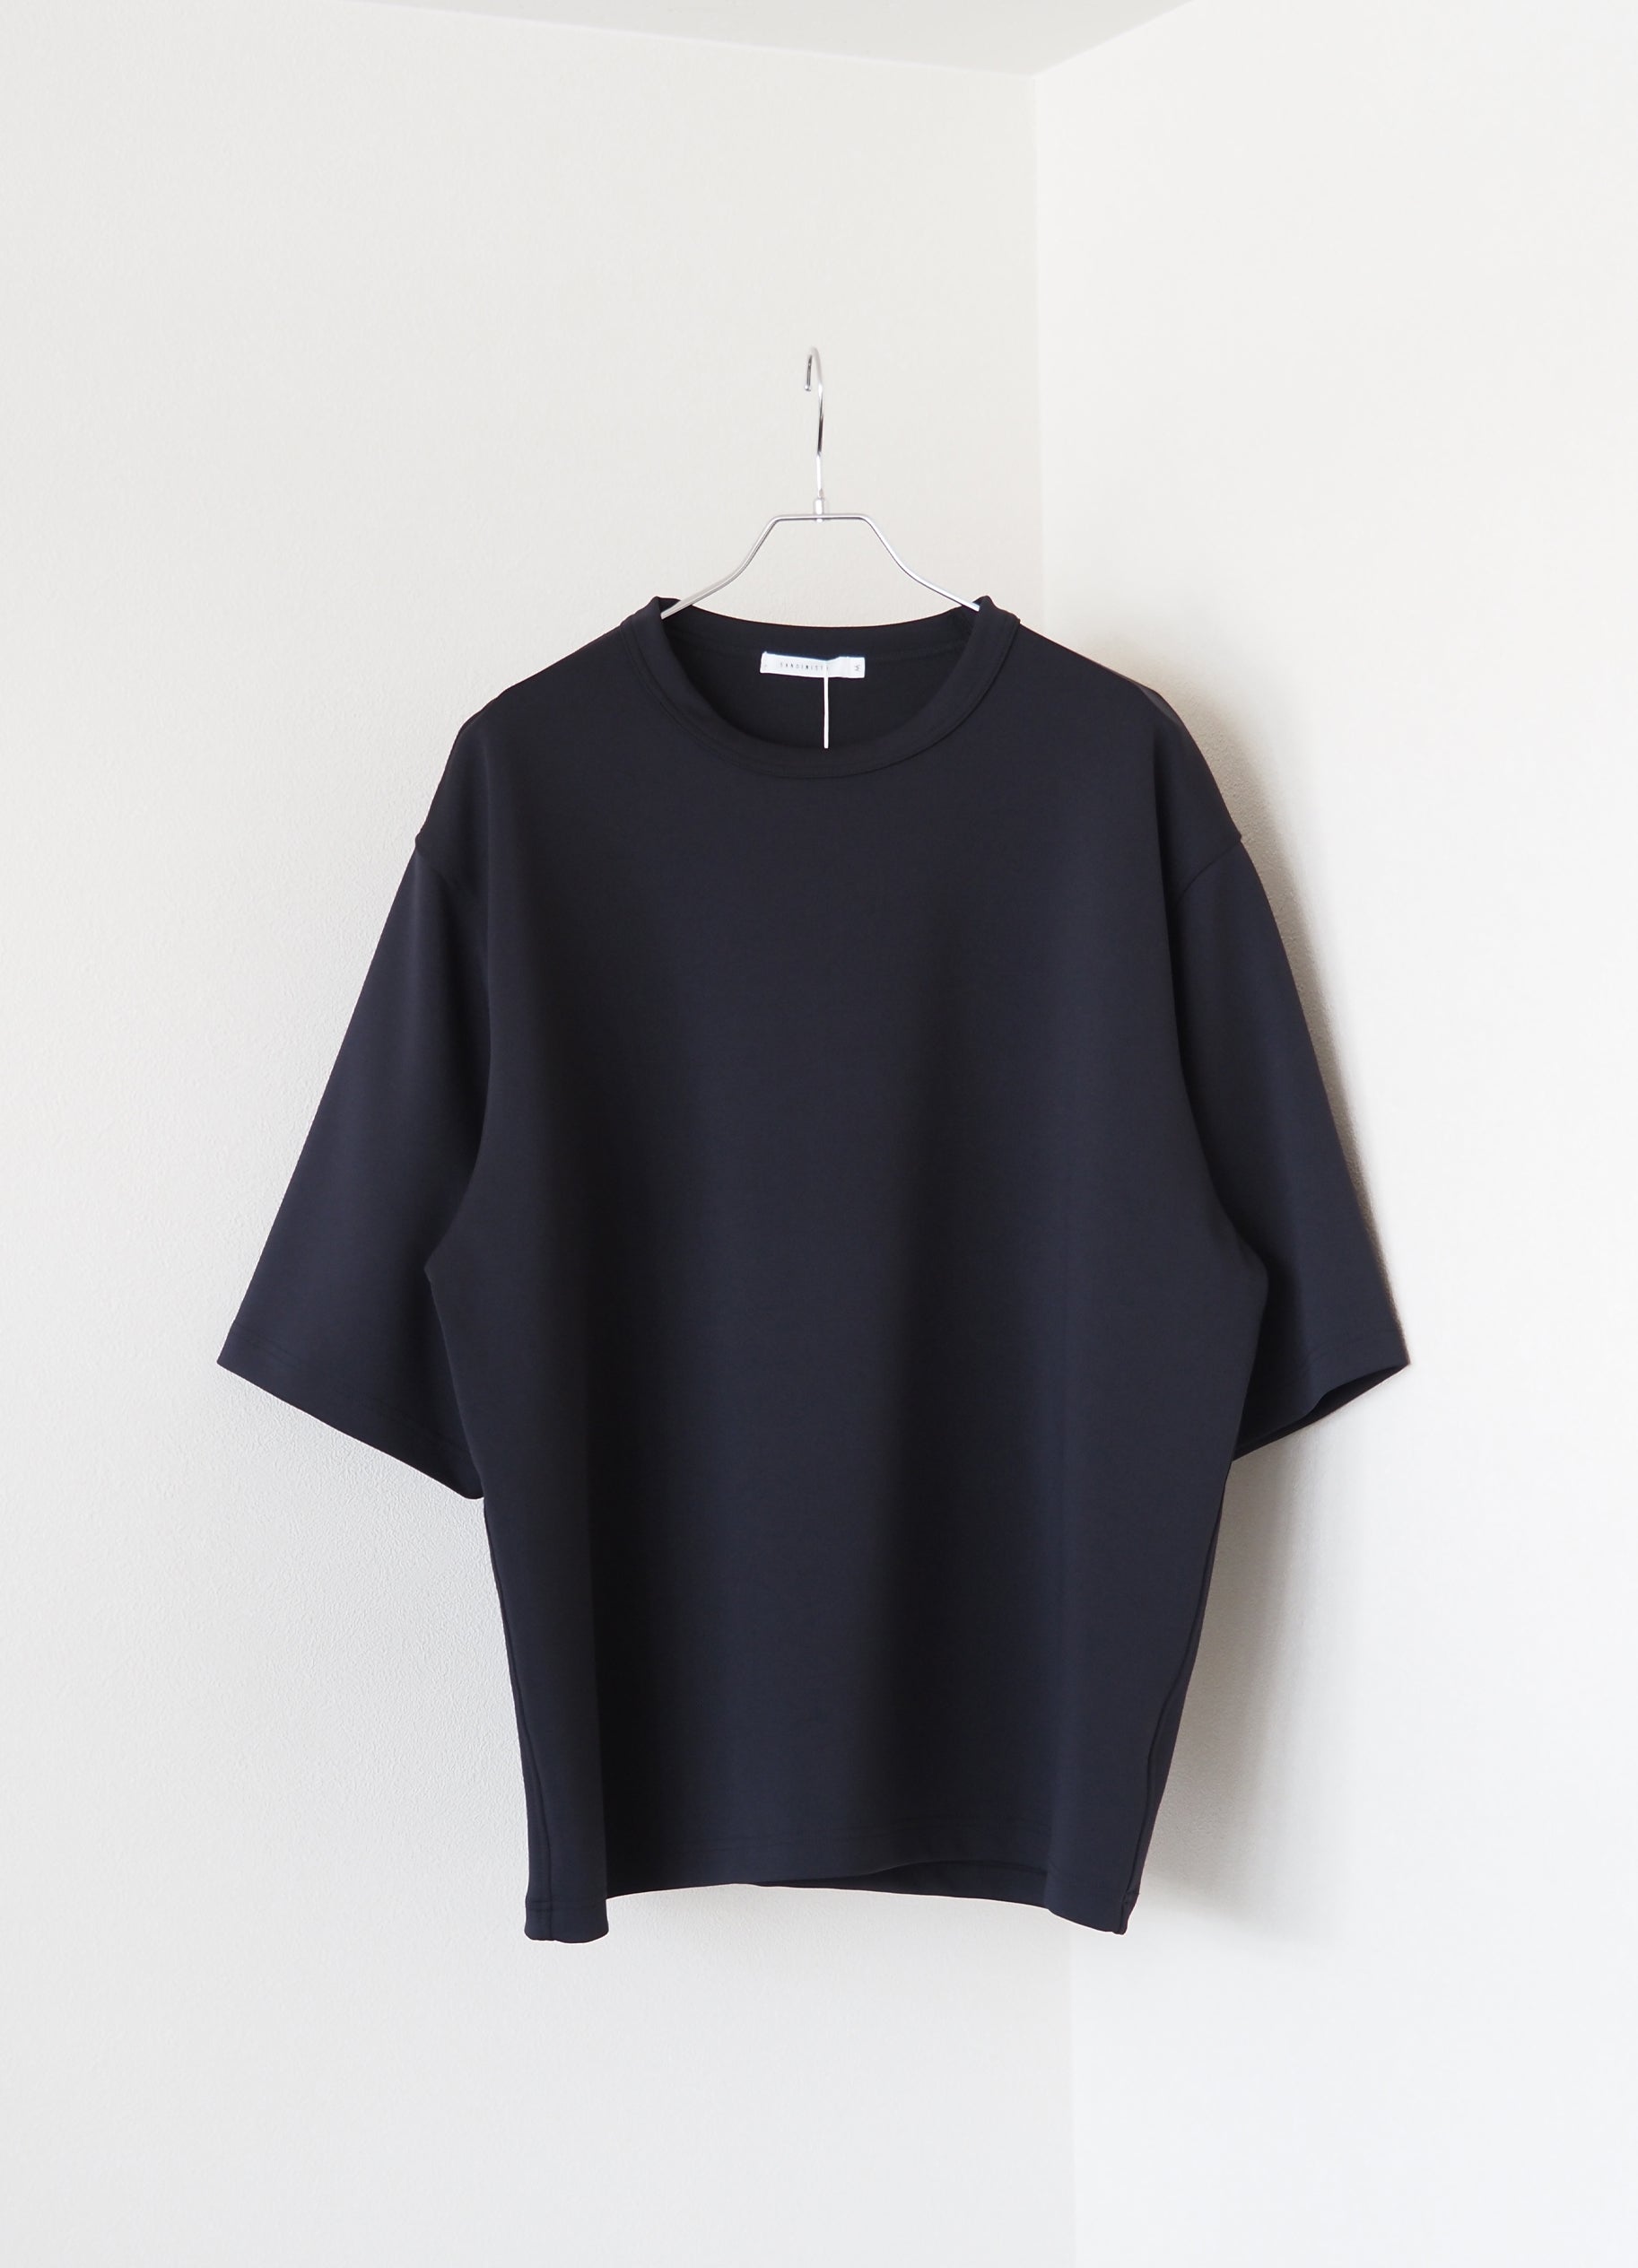 Sandinista(サンディニスタ) / Double Knit H-S Tee [SPR23-07-TP 